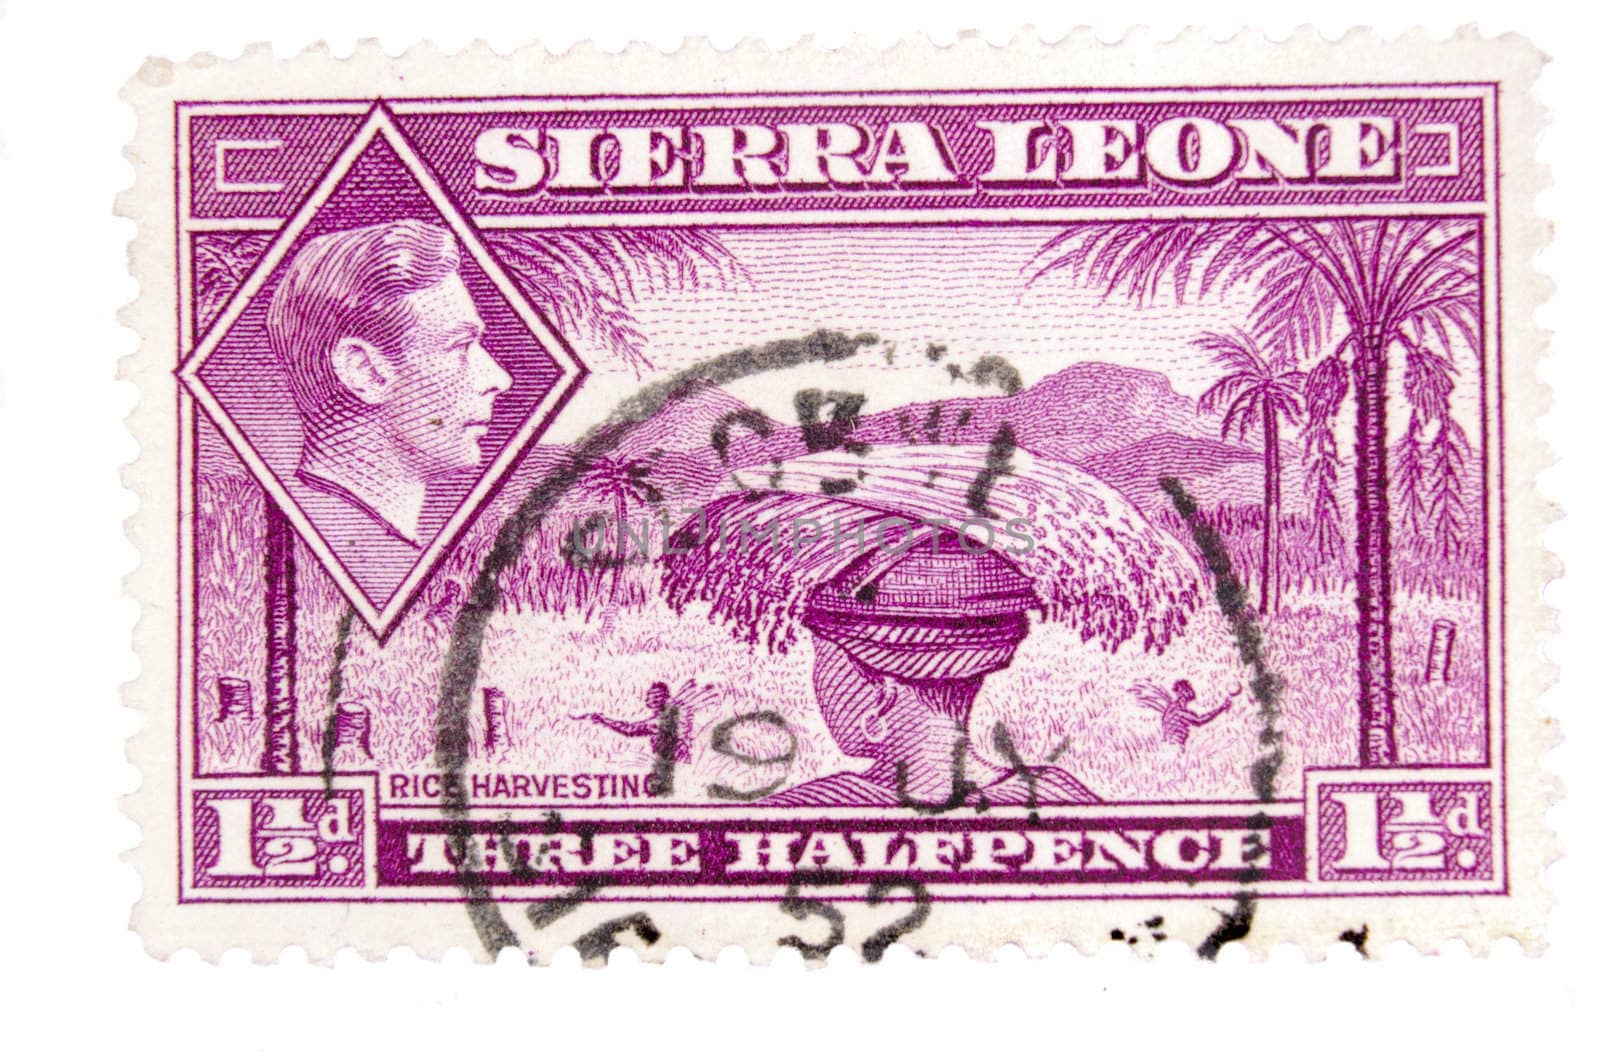 Canada - Circa 1952 : A vintage Sierra Leone postage stamp image of a woman carrying rice on her head with an inset of King George, and value of one and a half pence, series circa 1952